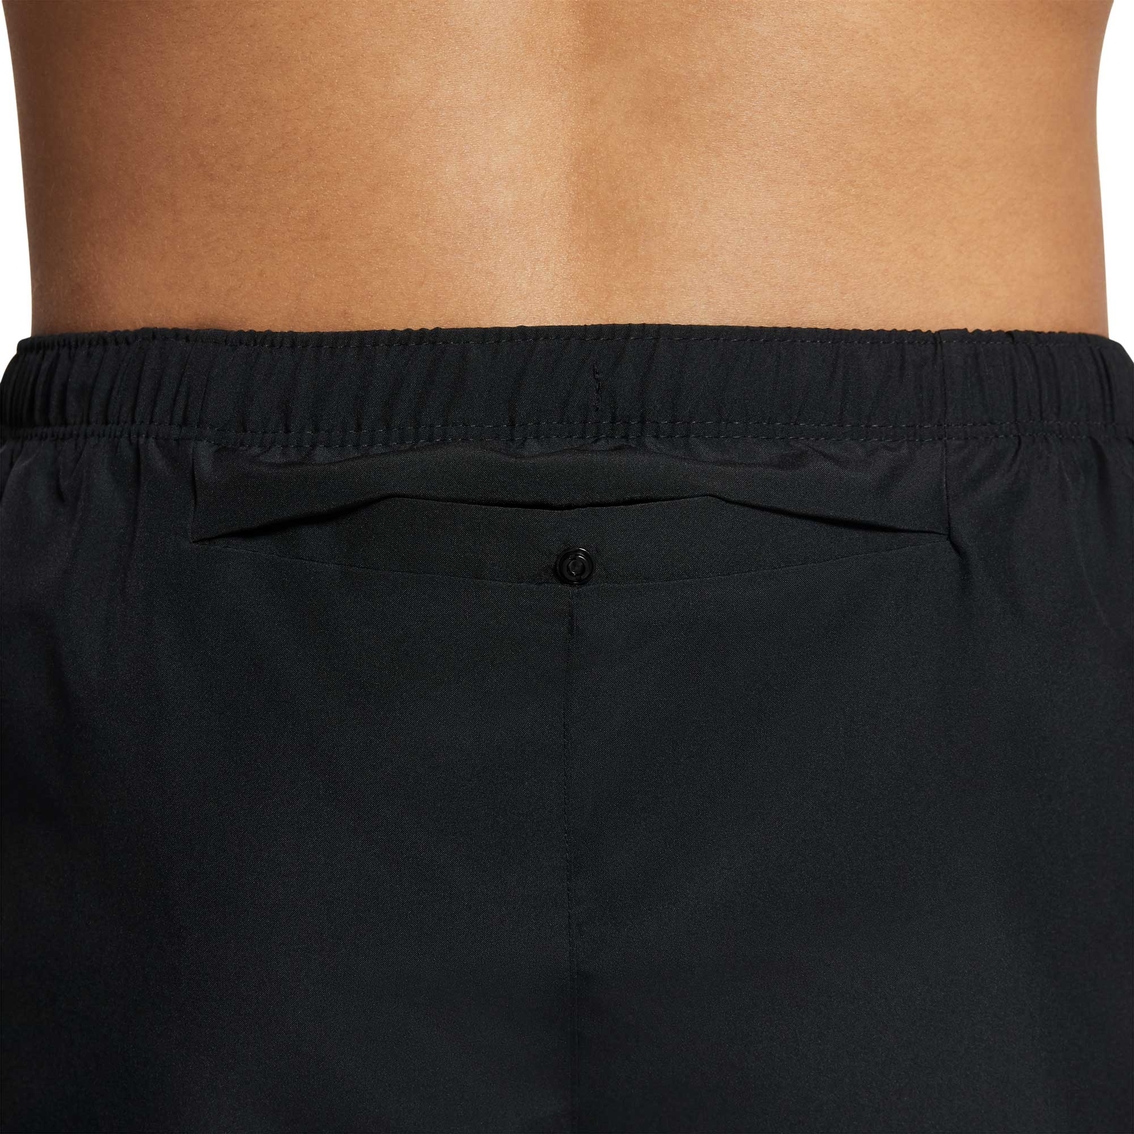 Nike Dri Fit 5 in. Challenger Running Shorts - Image 5 of 7